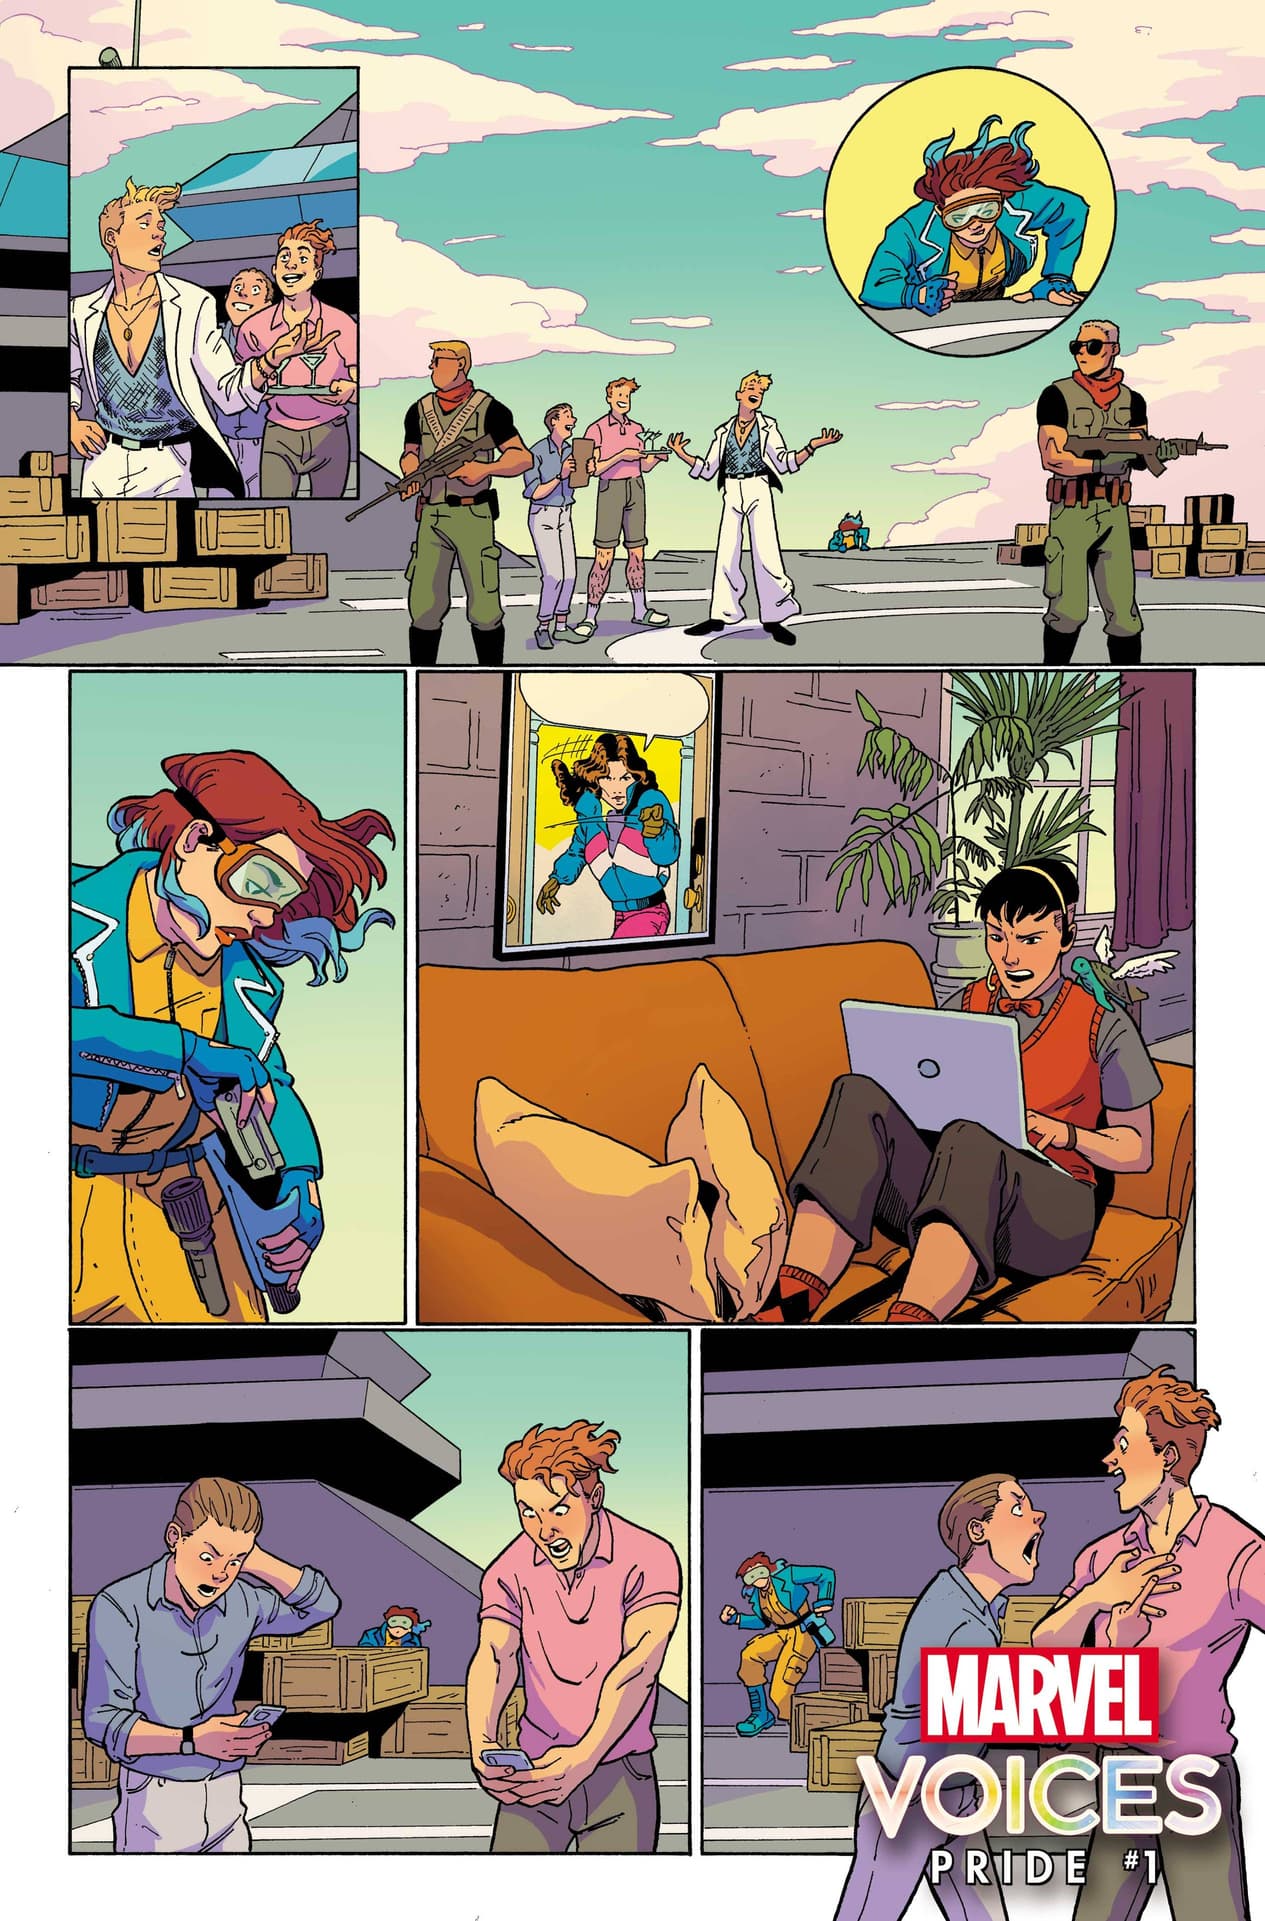 MARVEL'S VOICES: PRIDE #1 interior artwork by by Ted Brandt and Ro Stein